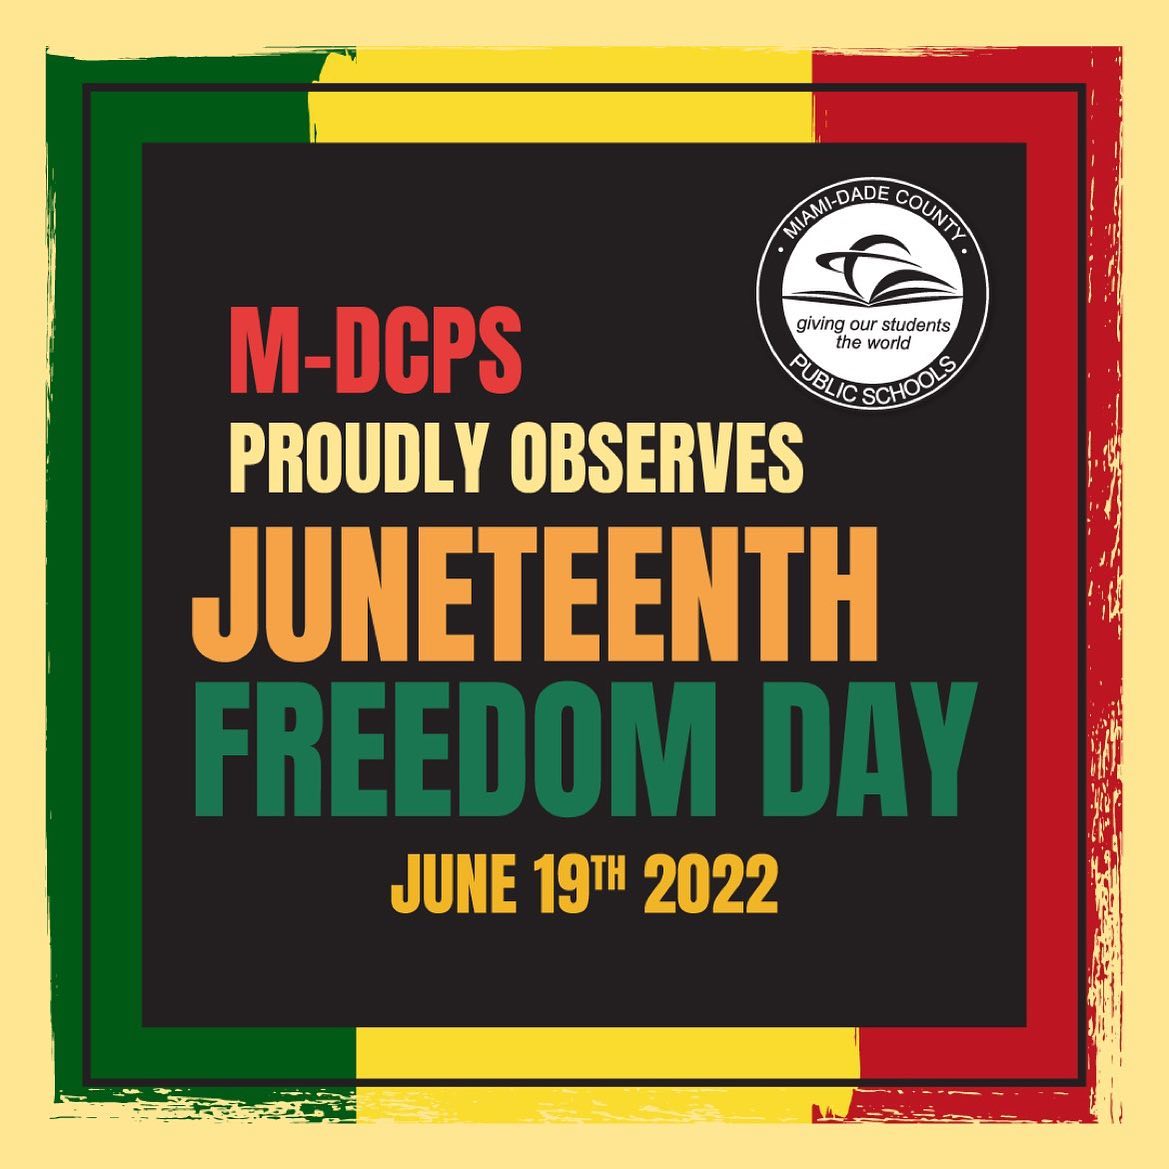 Repost from @miamischools
•
On #Juneteenth, join us in celebrating freedom and cultivating knowledge and appreciation of African American history, culture and education. Let's embrace our differences and celebrate them with respect and honor. #ValuesMatterMiami

#KLProcks @suptDotres @mdcpscommunity @miamischools @mdcps_d2 @mdcps_central